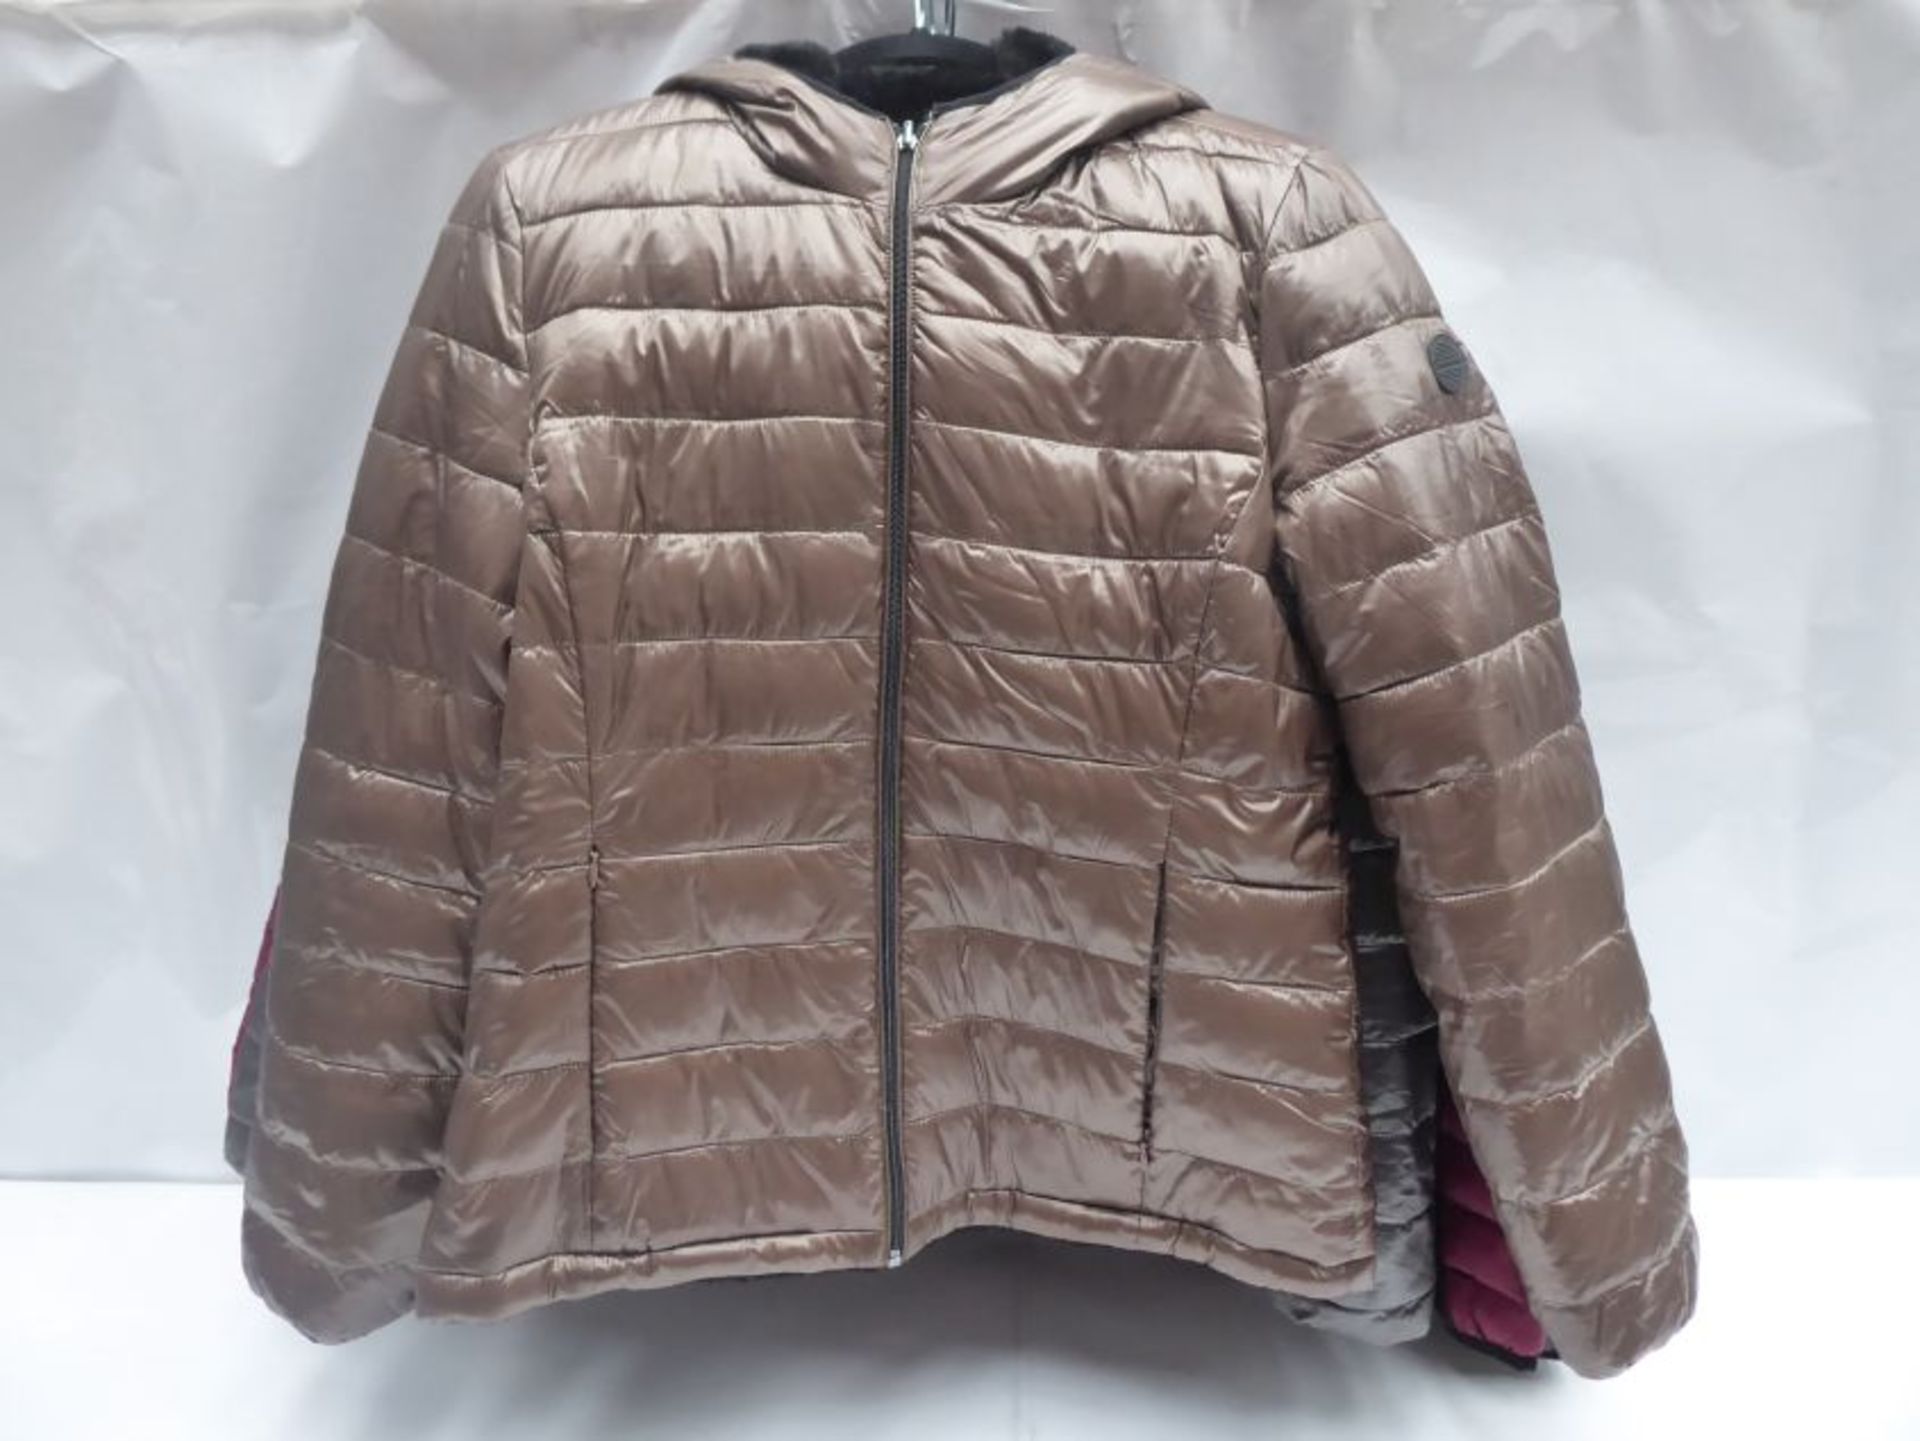 Collection of five quilted jackets by Andrew Marc and Michael Kors, in gold, silver, red, blue and